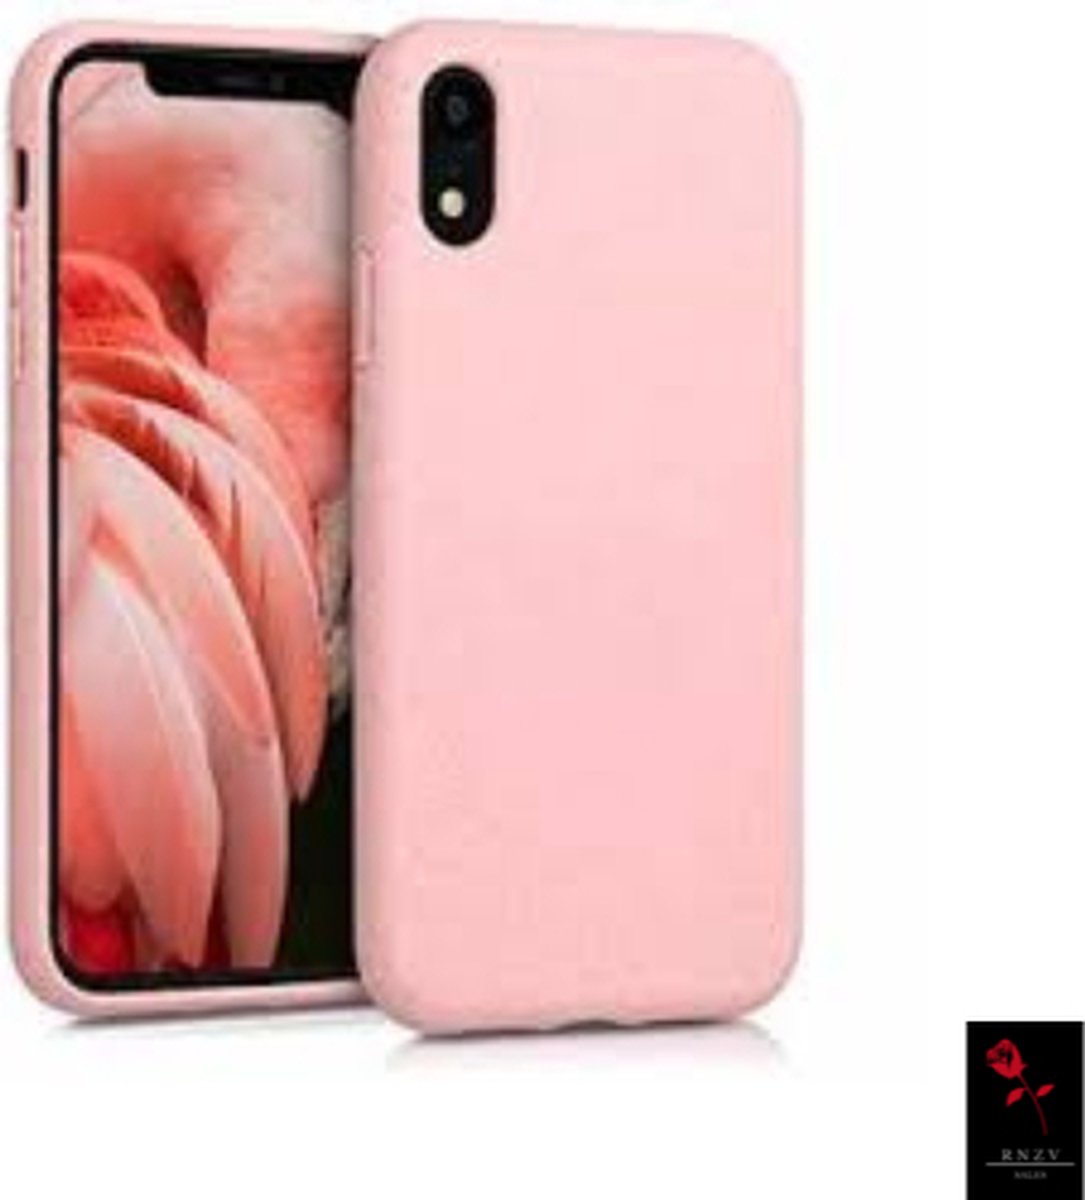 RNZV- IPHONE X/XS case - organic wheat straw case - organisch iphone hoesje - organic case - recycled iphone case - recycled - ROZE